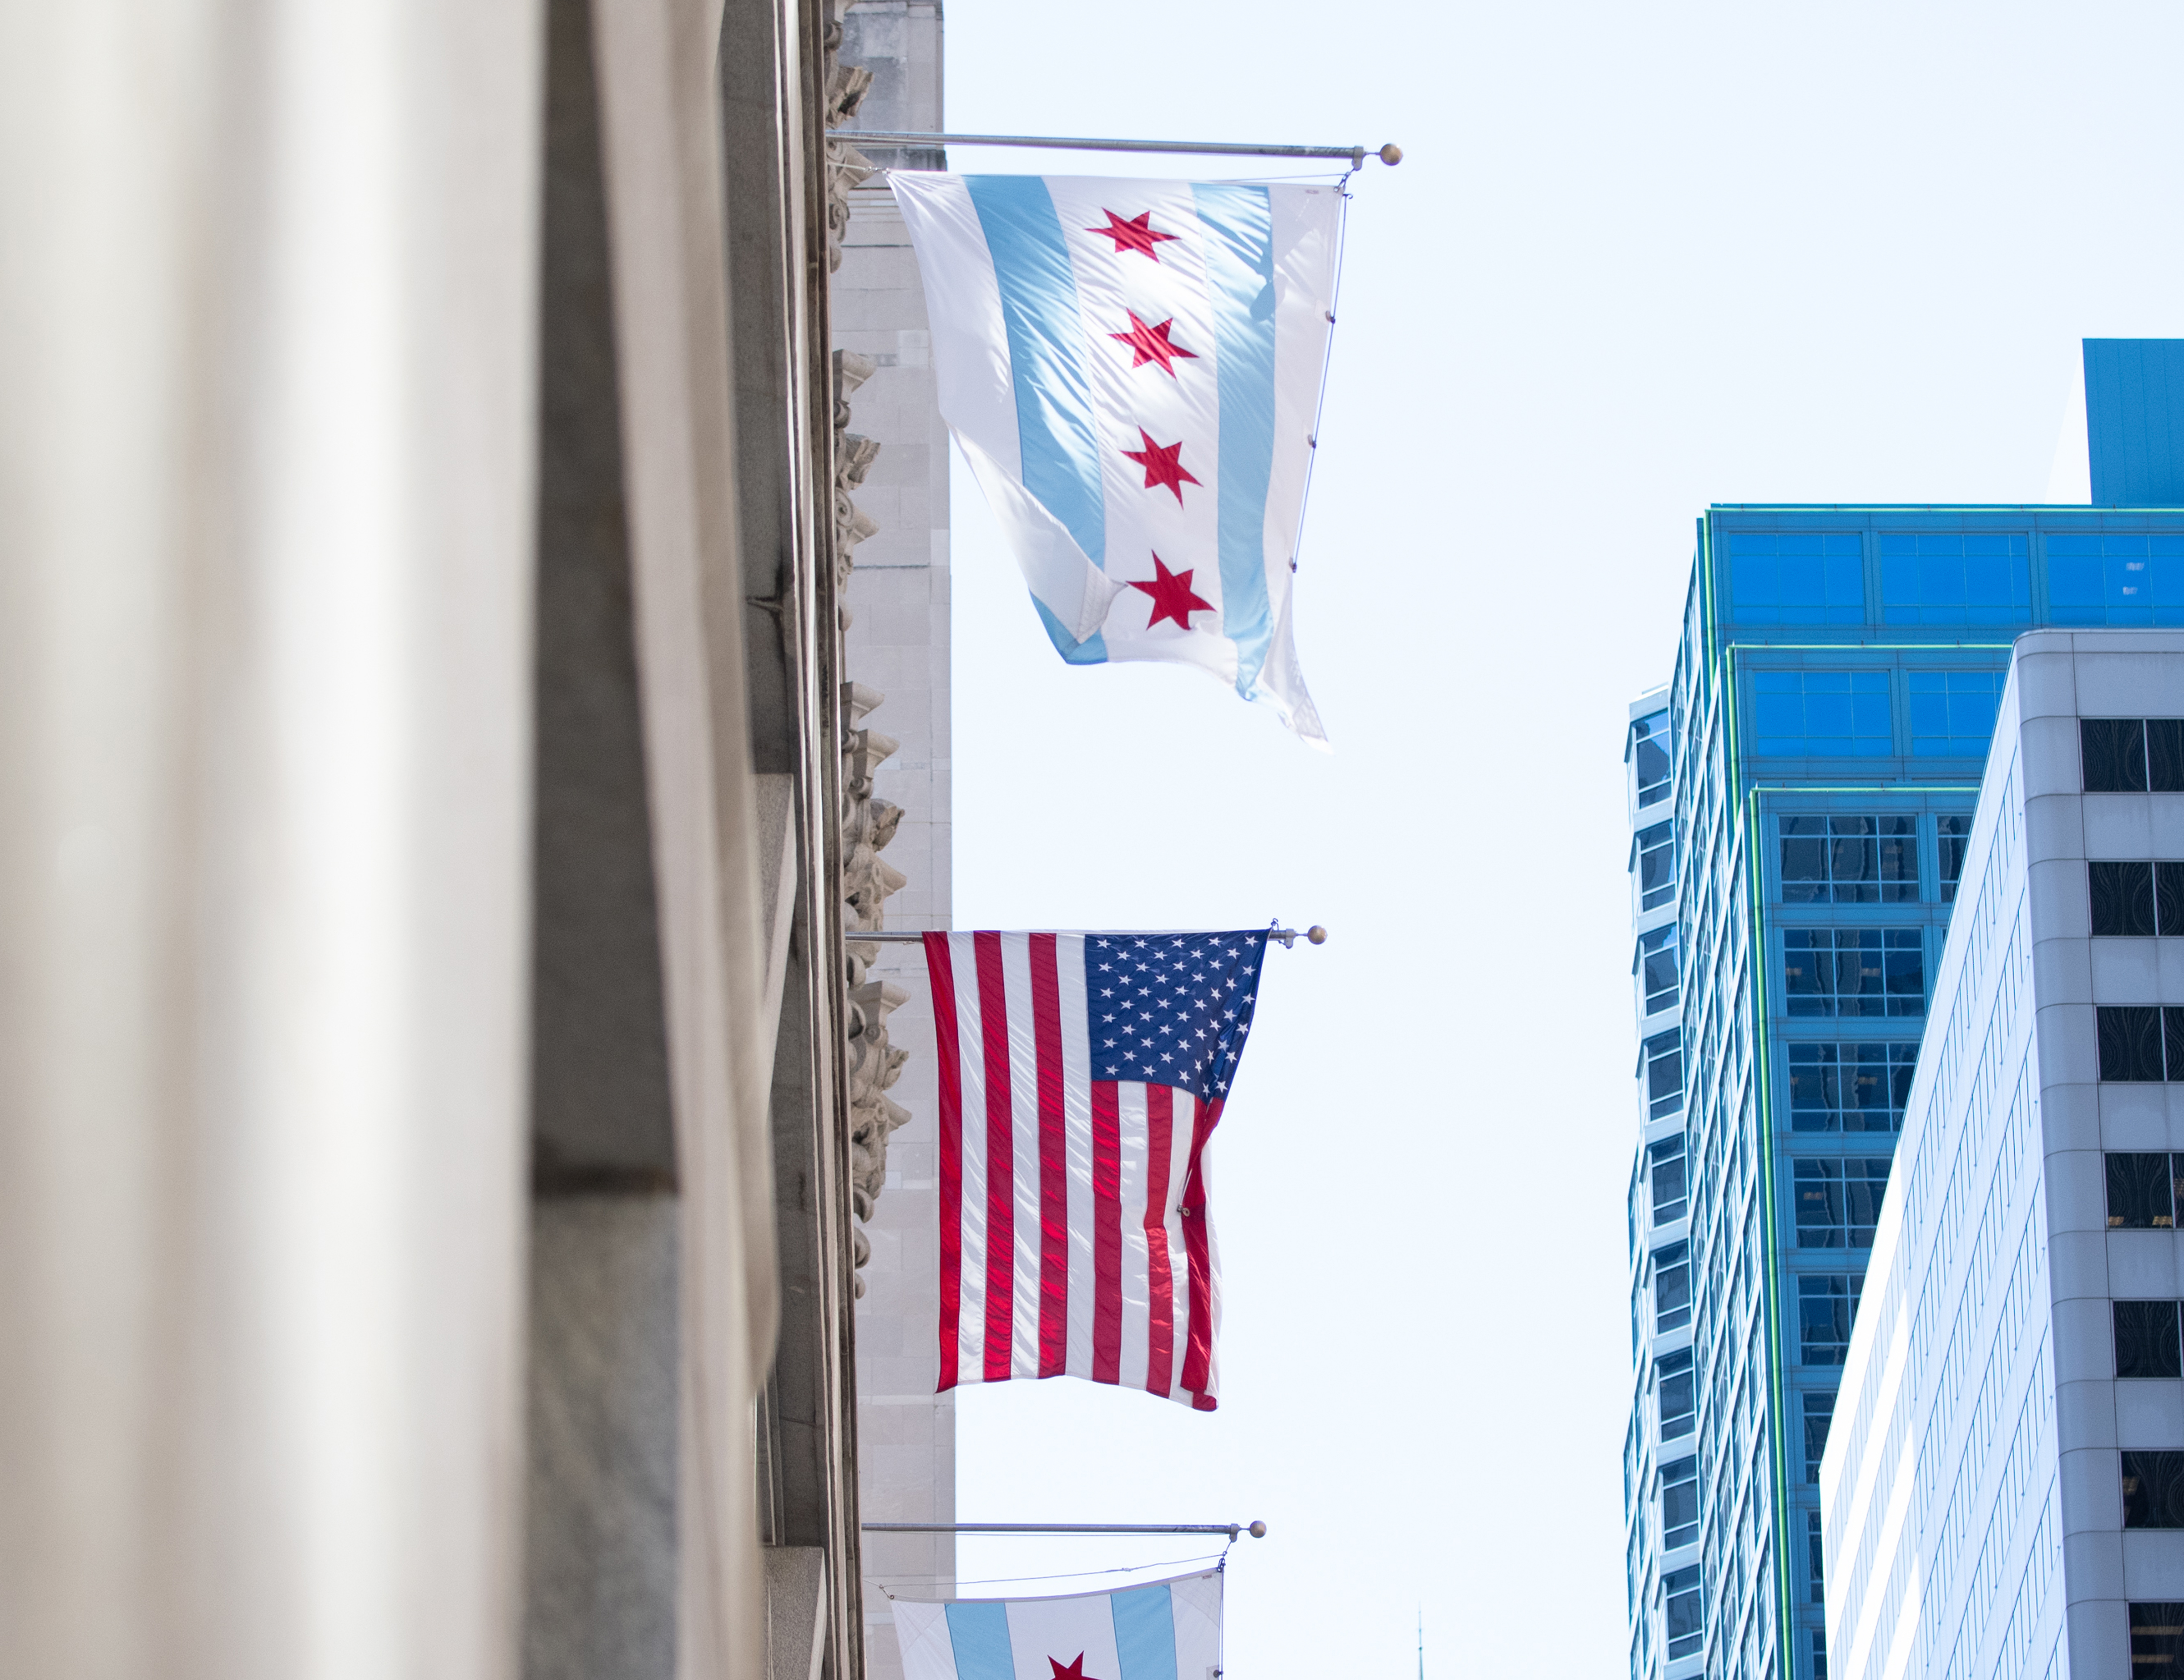 The current Chicago city flag hangs outside City Hall.